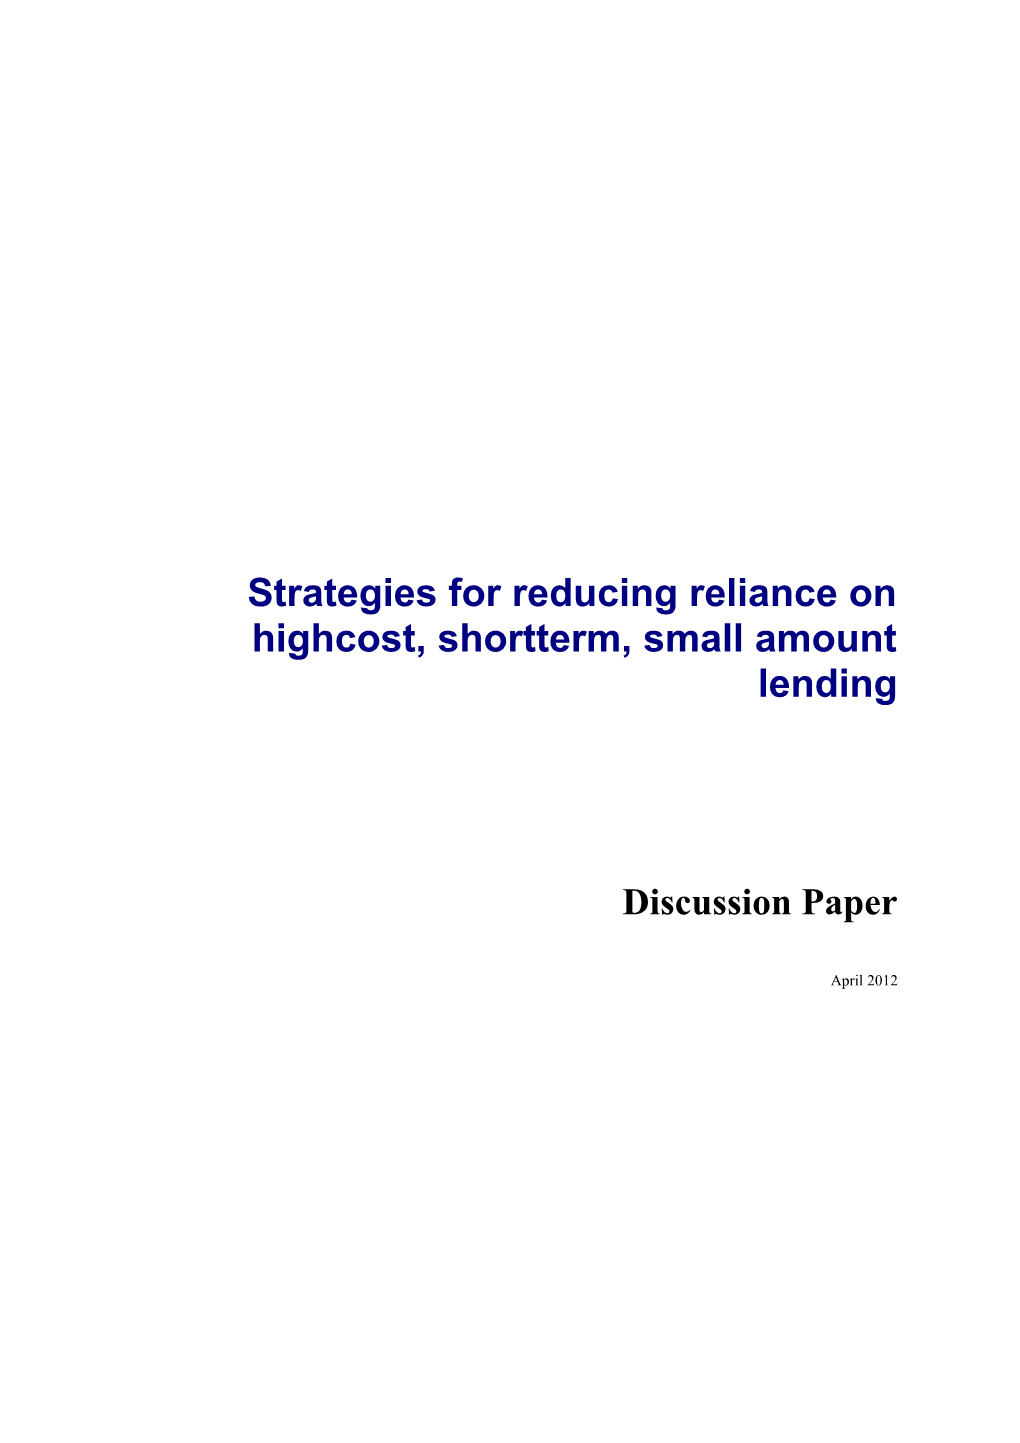 Strategies for Reducing Reliance on High Cost, Short Term, Small Amount Lending